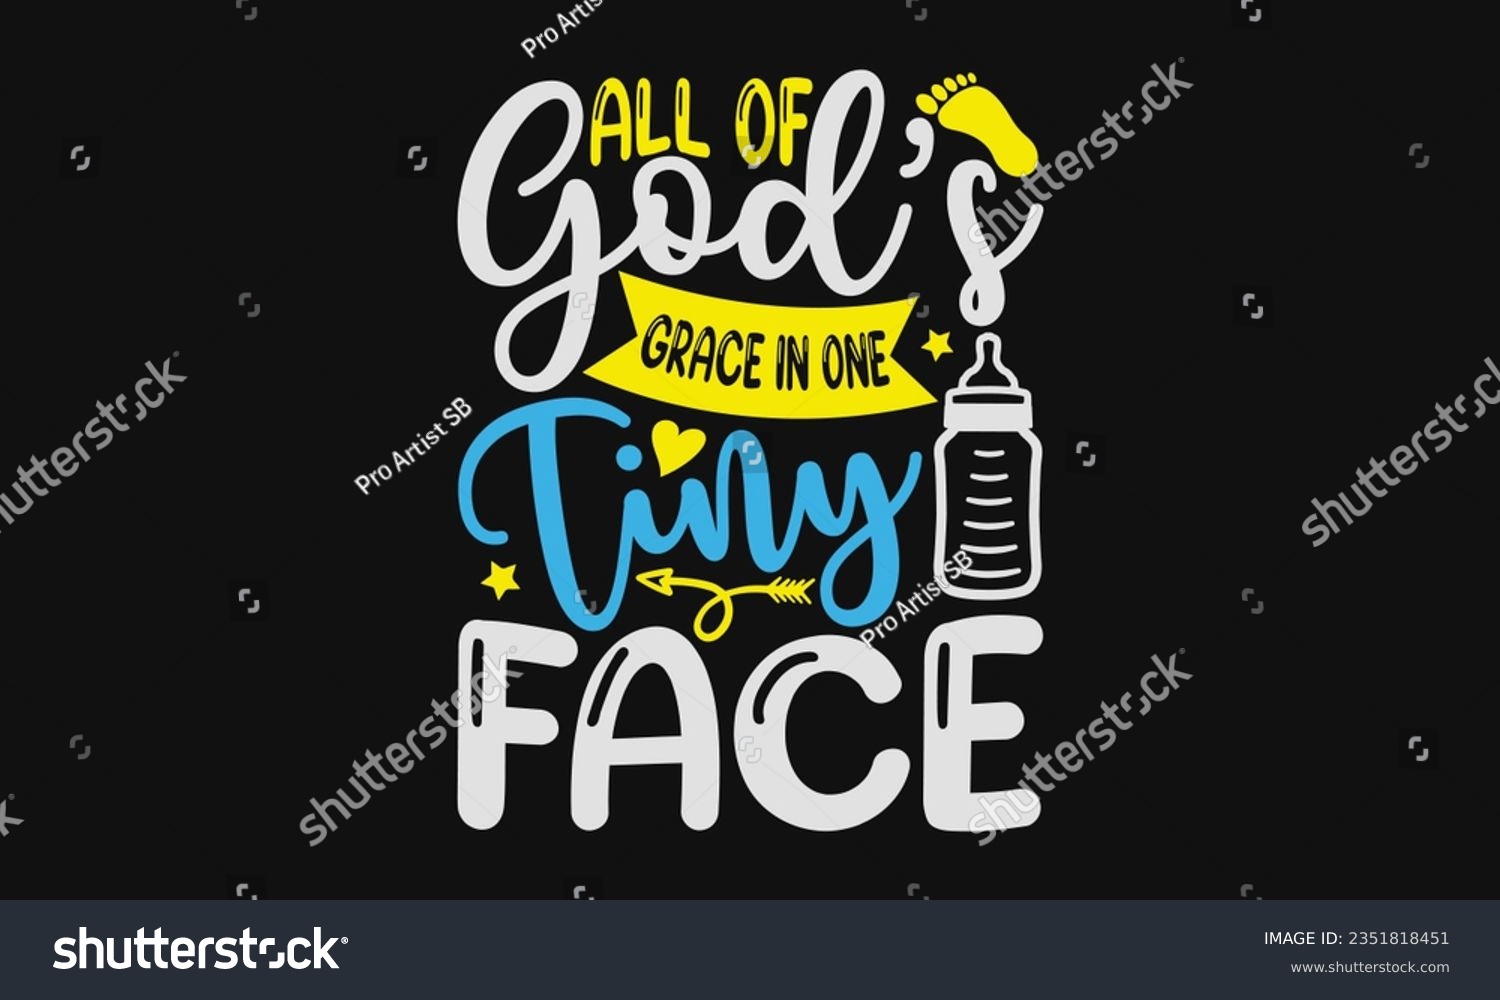 SVG of All of god’s grace in one tiny face - Baby SVG Design Sublimation, New Born Baby Quotes, Calligraphy Graphic Design, Typography Poster with Old Style Camera and Quote. svg